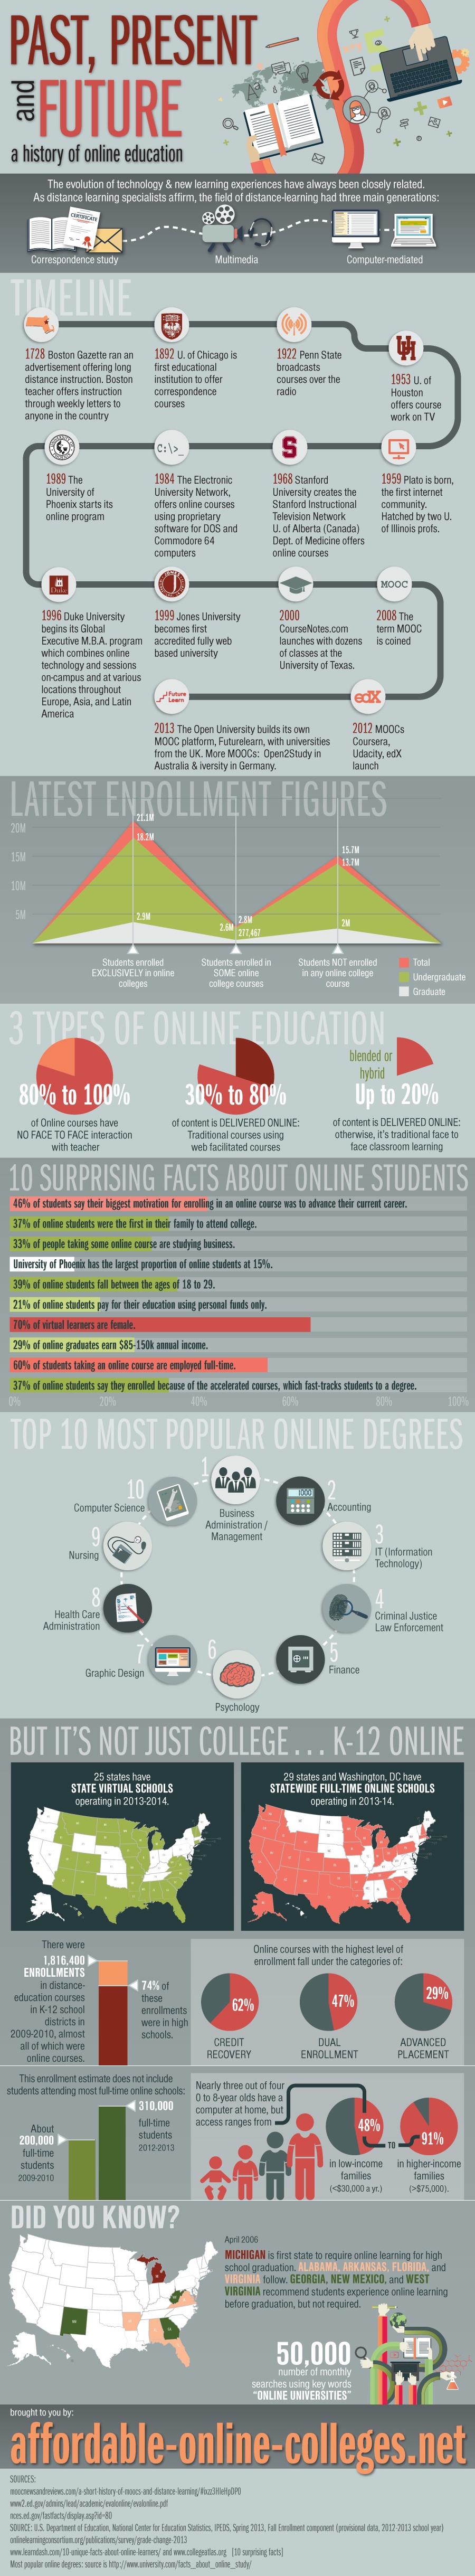 Past, Present and Future of Online Education Infographic